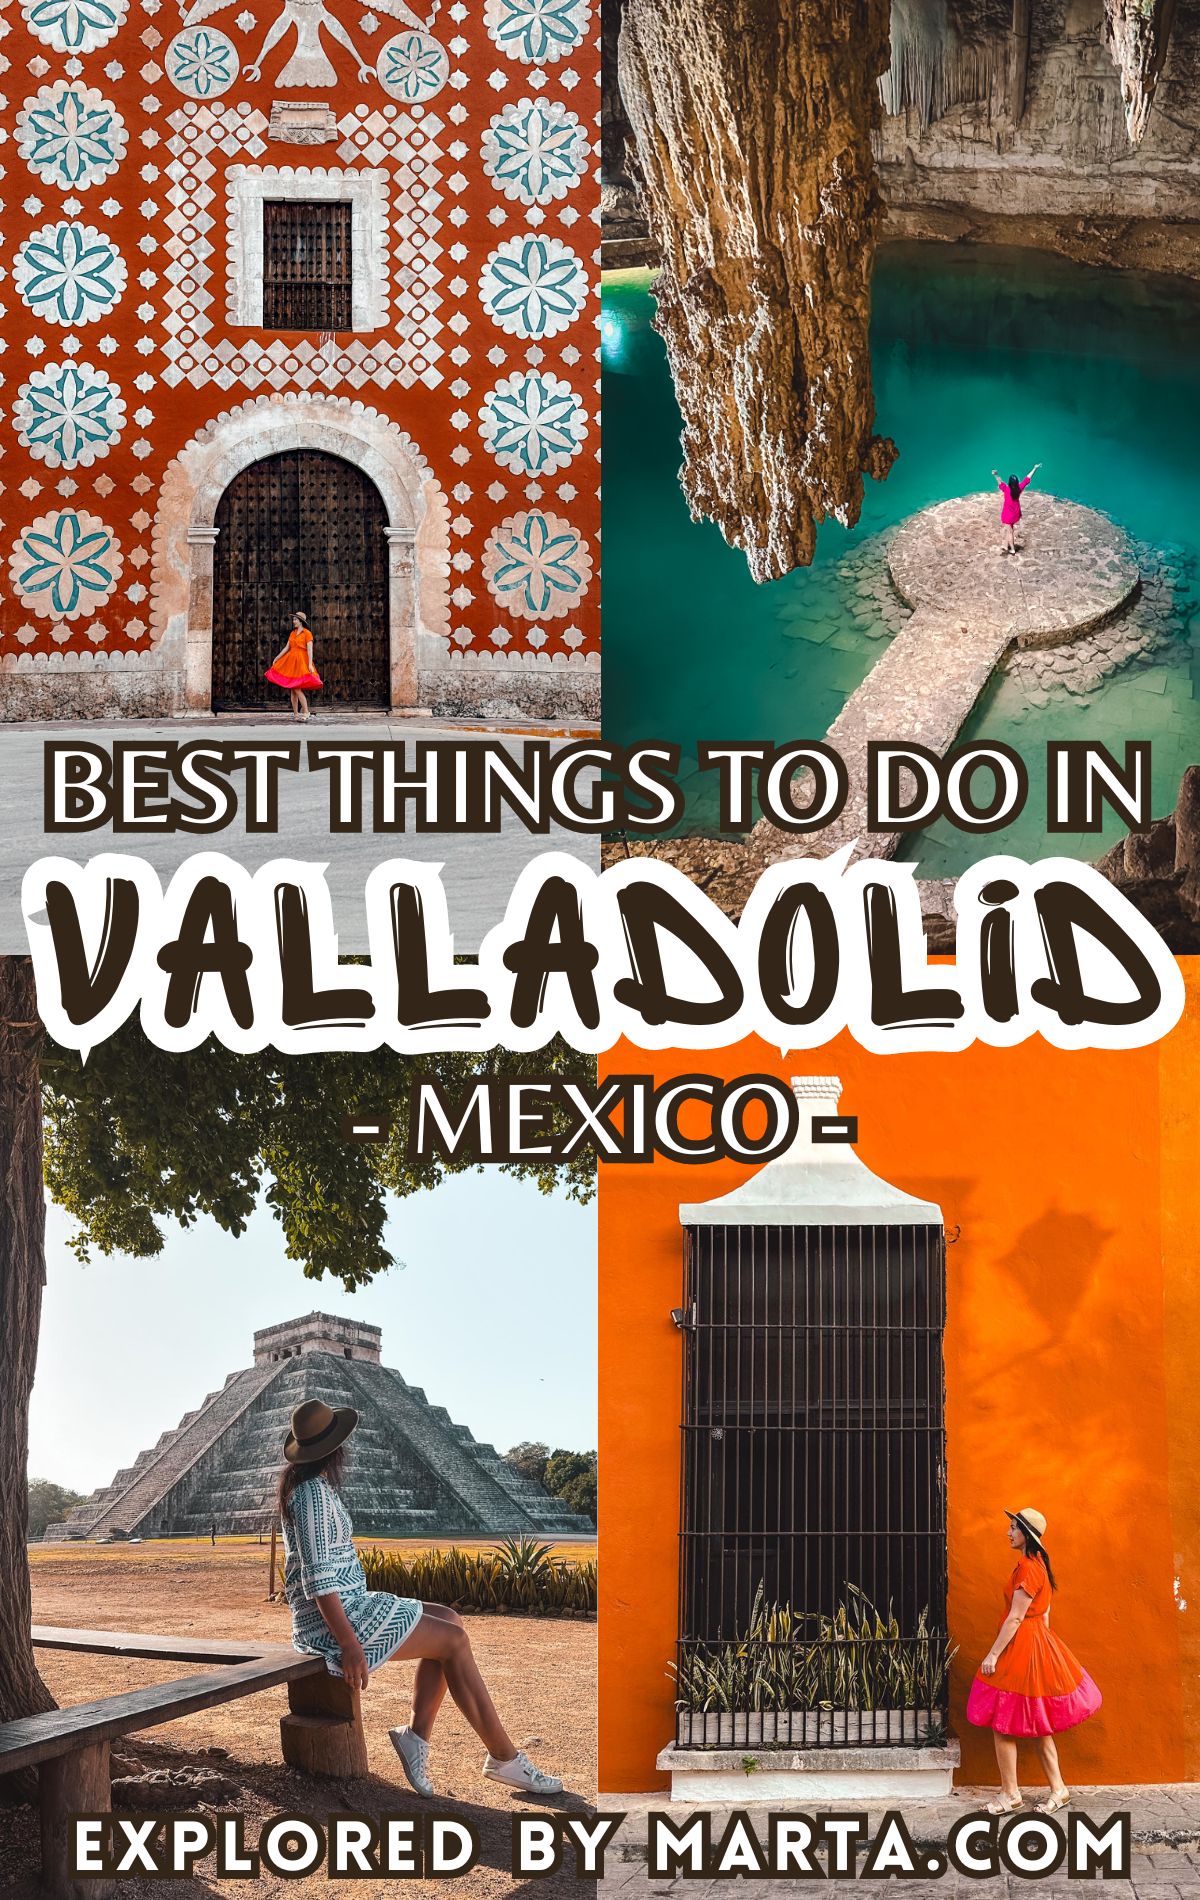 Valladolid, Mexico - best things to do in Valladolid, Mexico